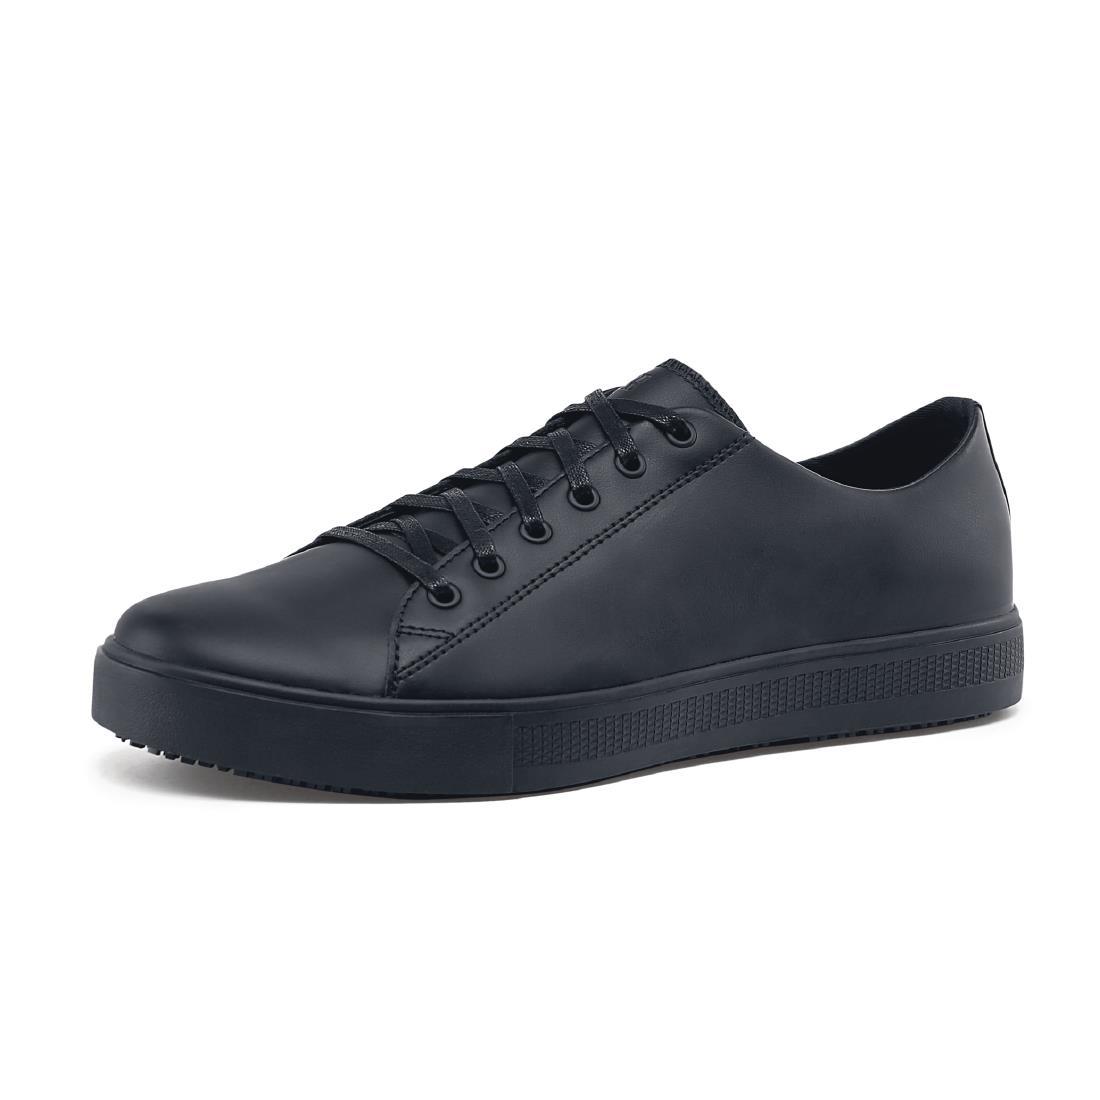 Shoes for Crews Old School Trainers Black 41 - BB161-41  - 6